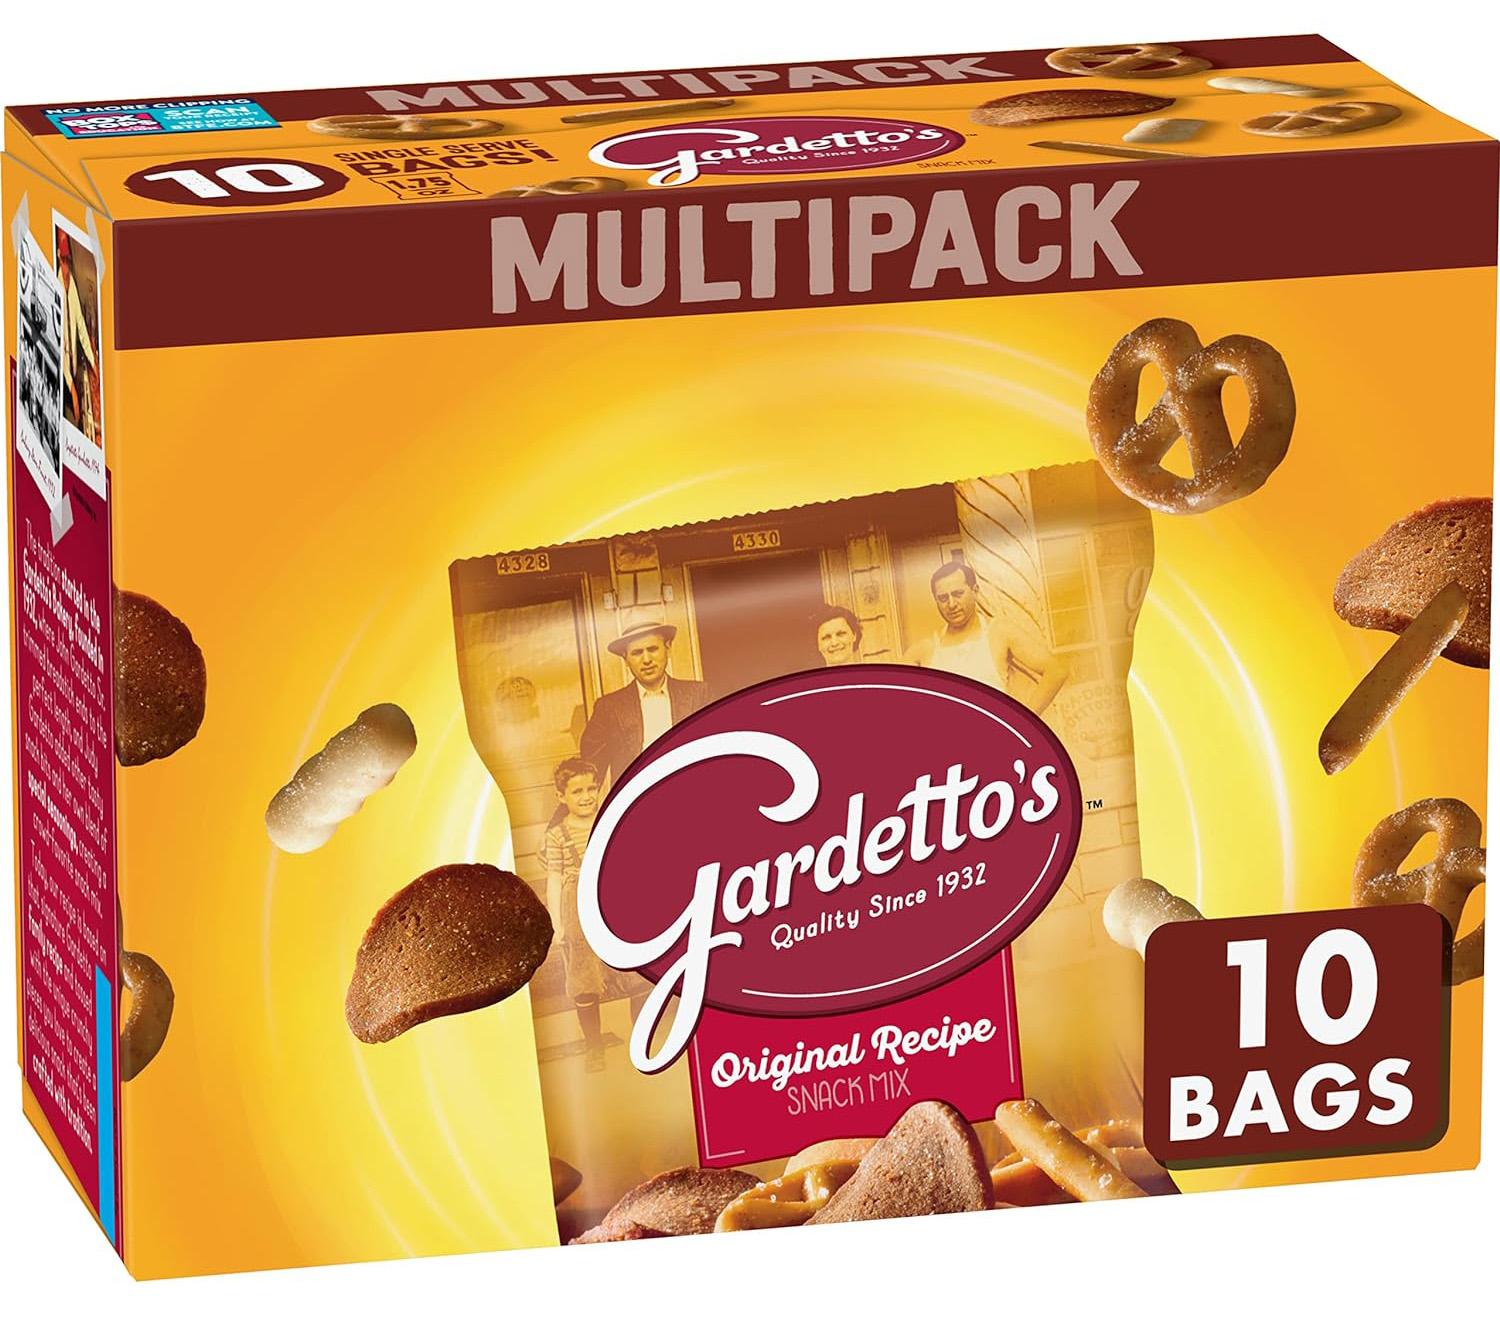 Gardettos Snack Mix Multipack Snack Bags 10 Pack for $4.74